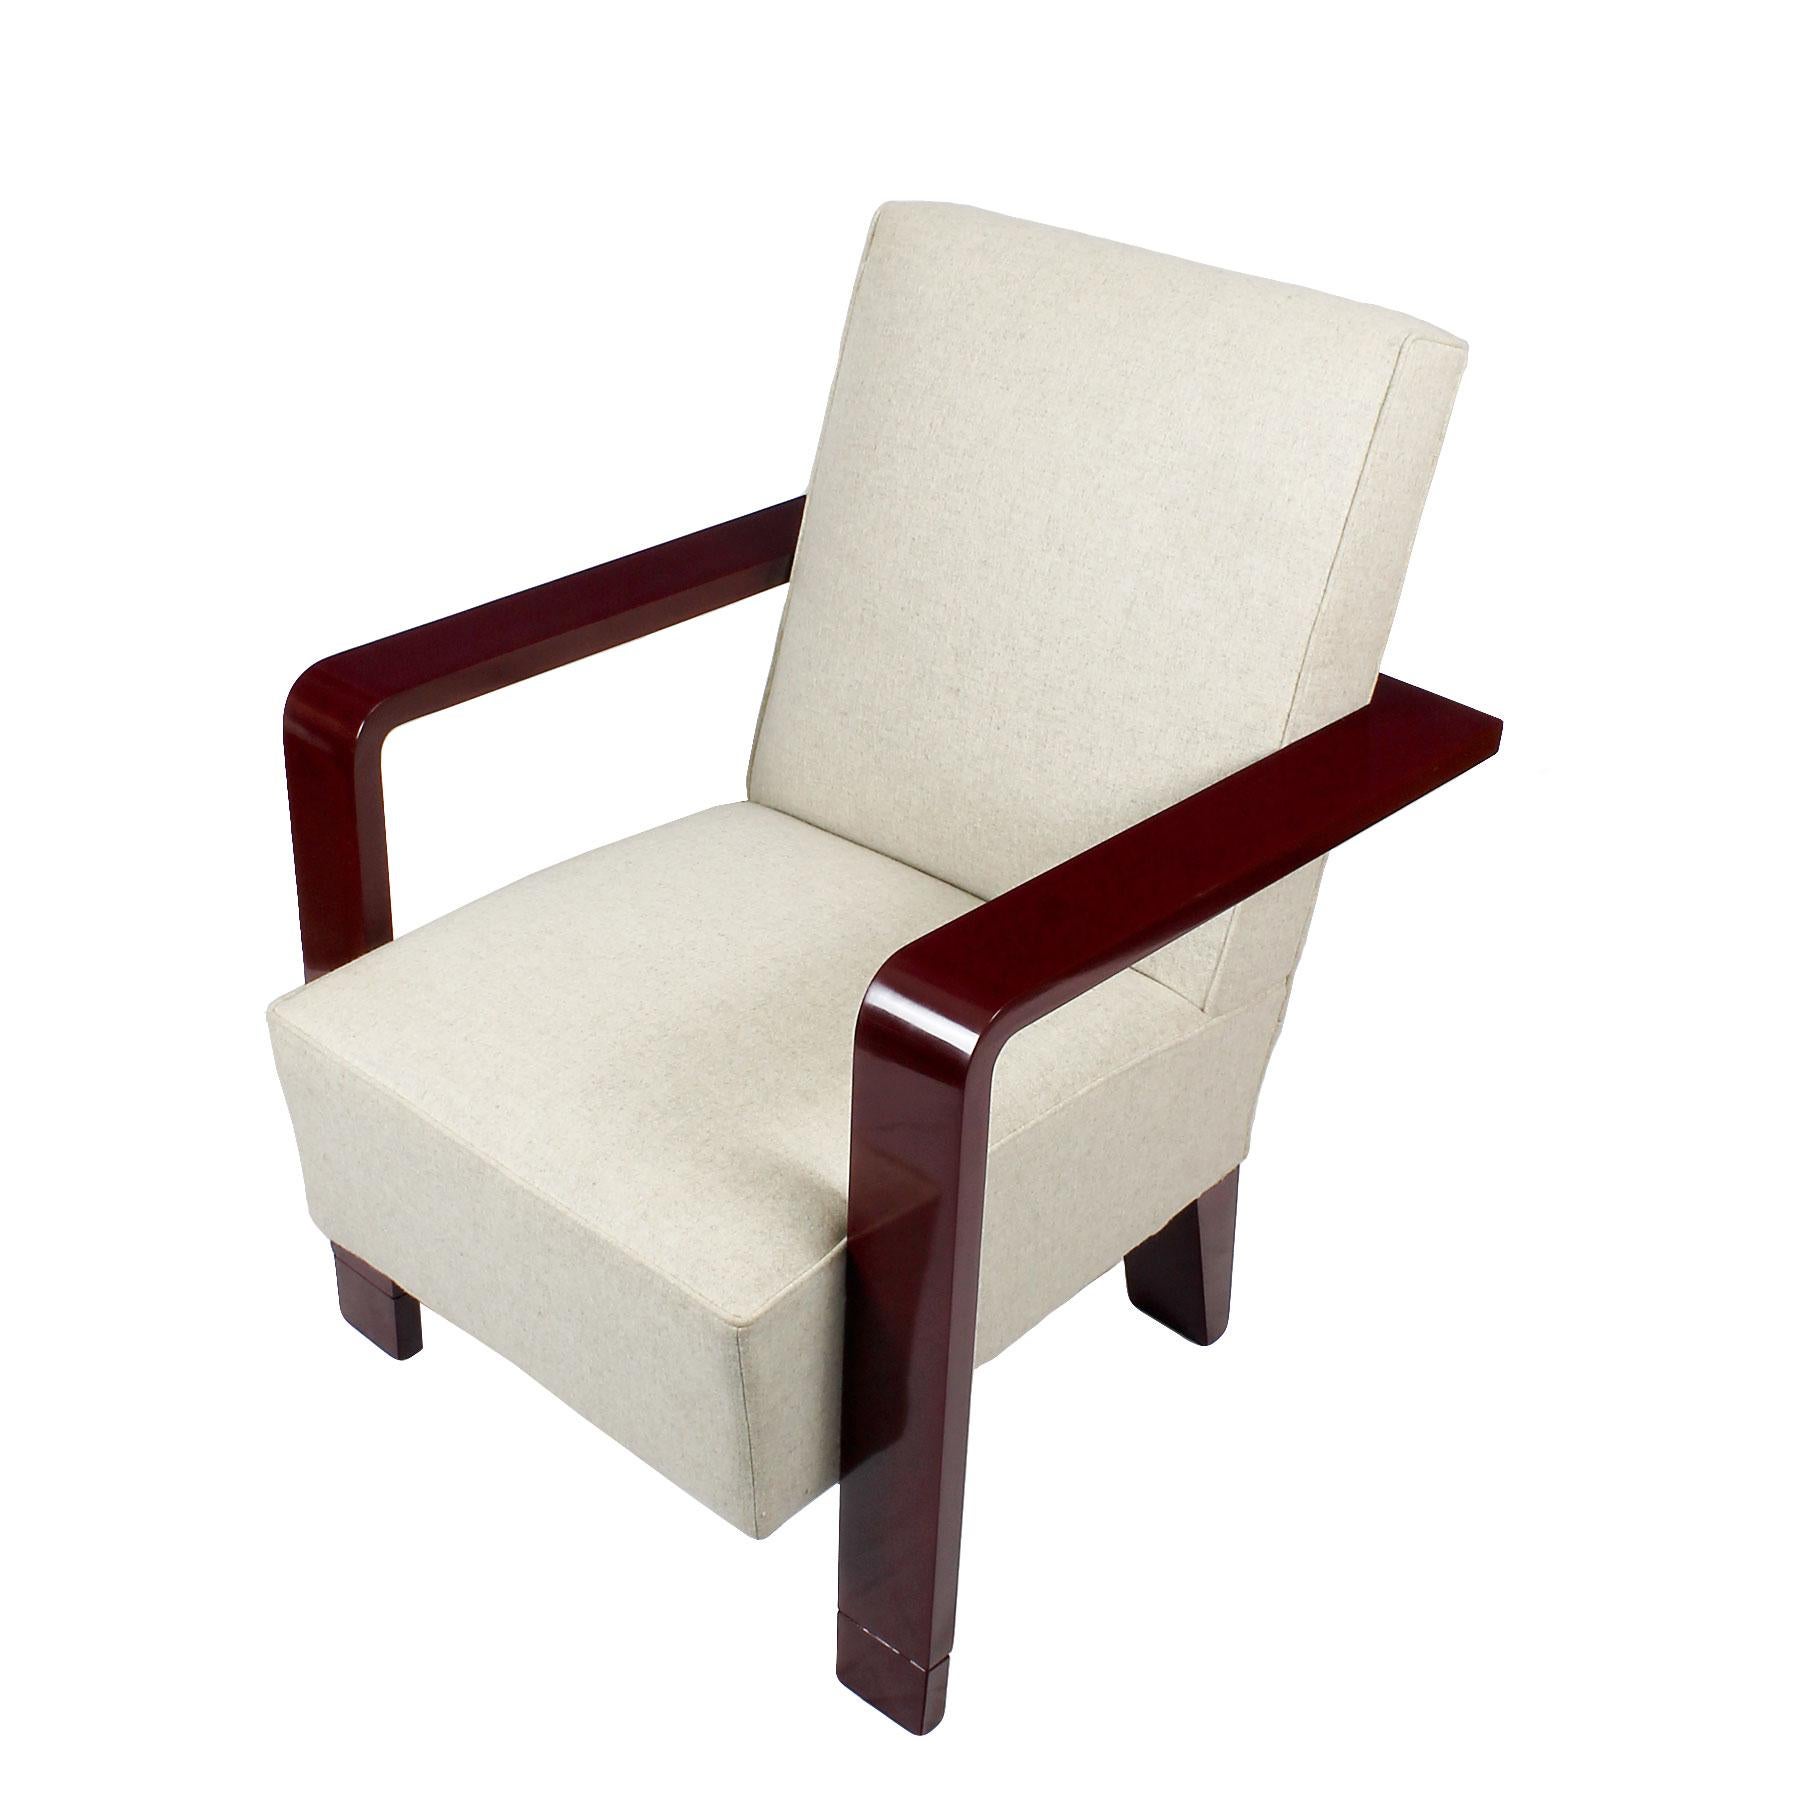 1930s Art Deco Armchair, Lacquered Beech, Off-White Wool - Belgium For Sale 1